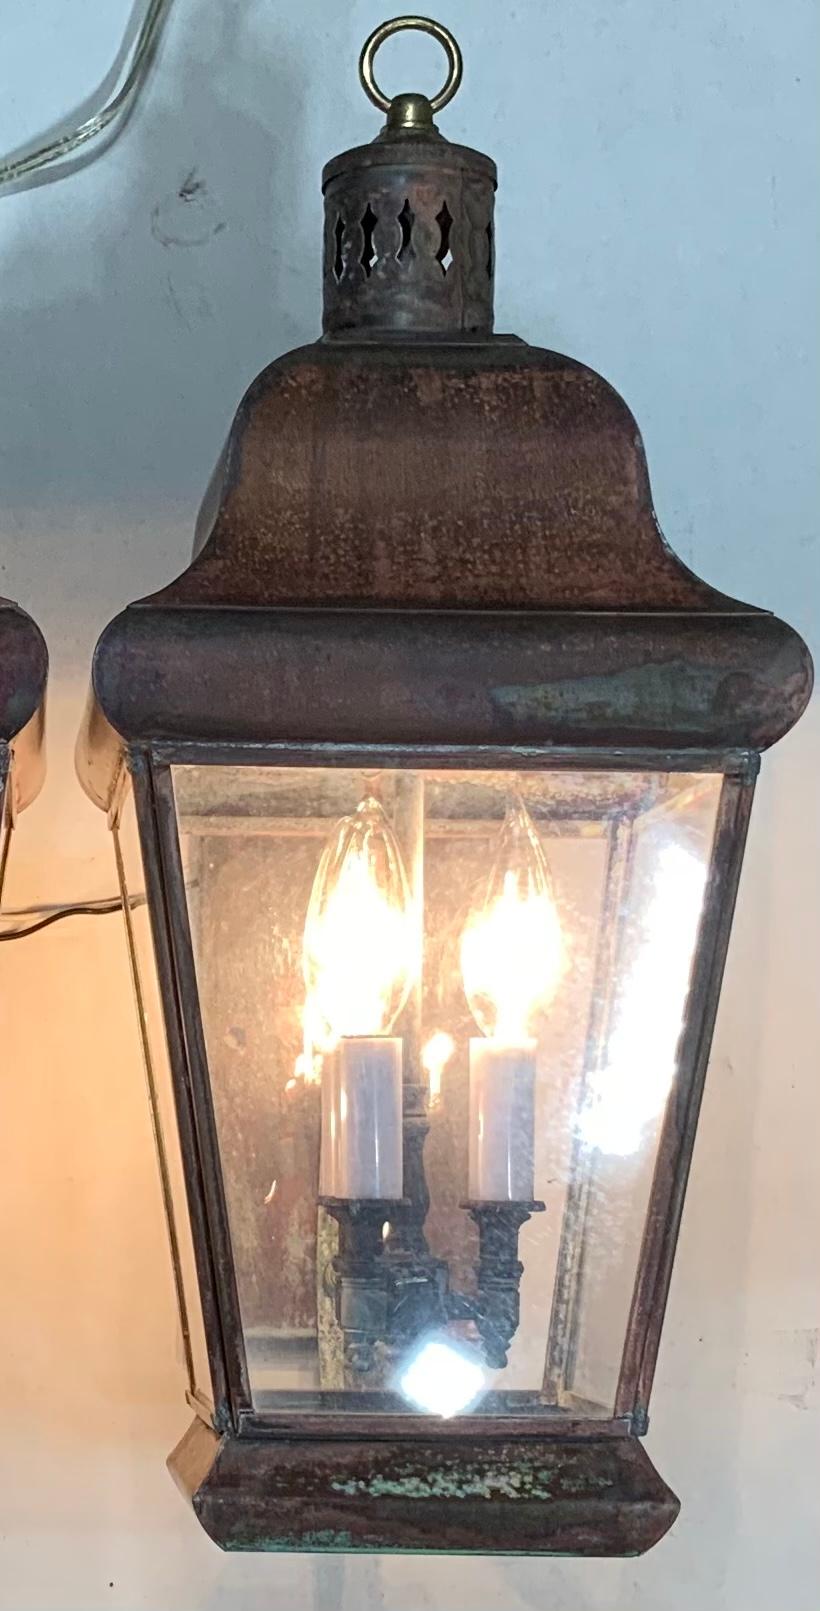 Elegant pair of wall lantern made of solid brass, with three 40 /watt light each. Original Plexiglass sides instead
Glass. Suitable for wet location.
In one lantern the cluster lights are higher than the other lantern, although will not make much